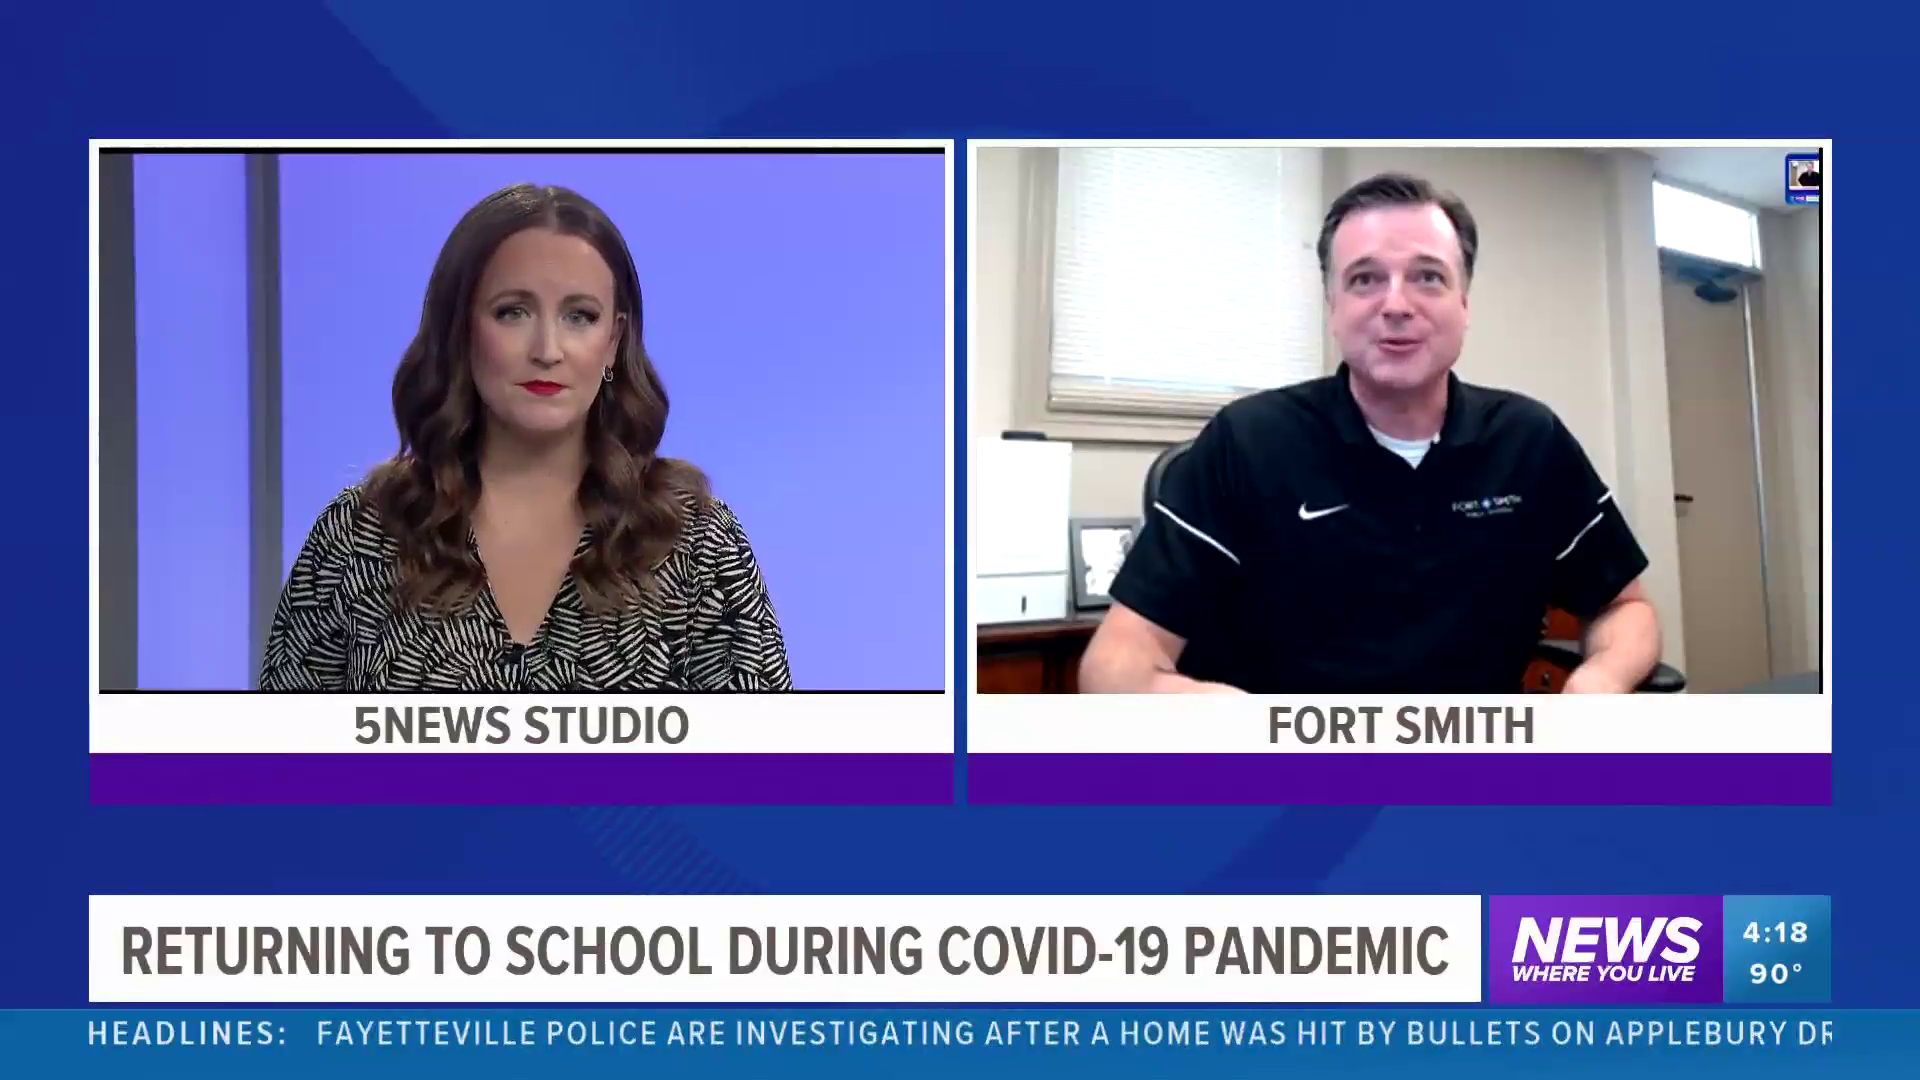 Fort Smith Public Schools Superintendent Dr. Doug Brubaker joined 5NEWS to discuss the district's plans to return to school amid the coronavirus pandemic.